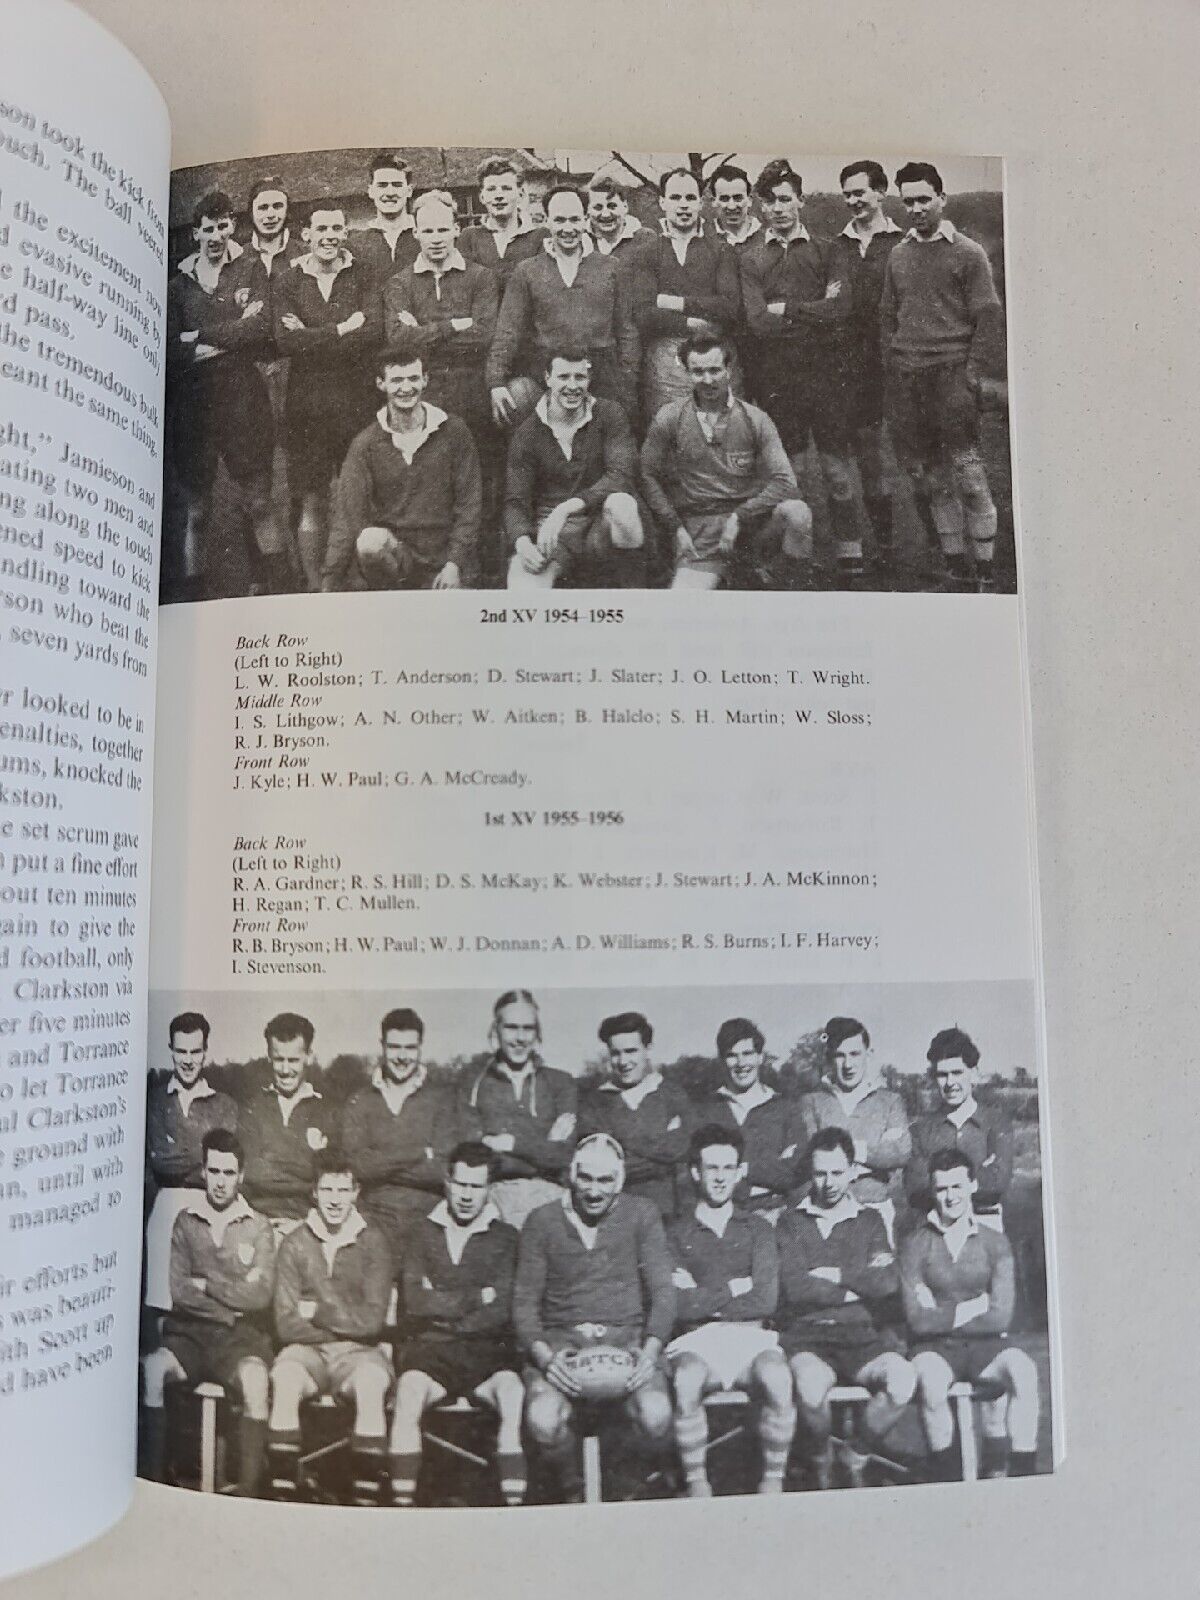 Making a Mark, the Story of Clarkston R.F.C. 1937 -1977 by McCready (1978)